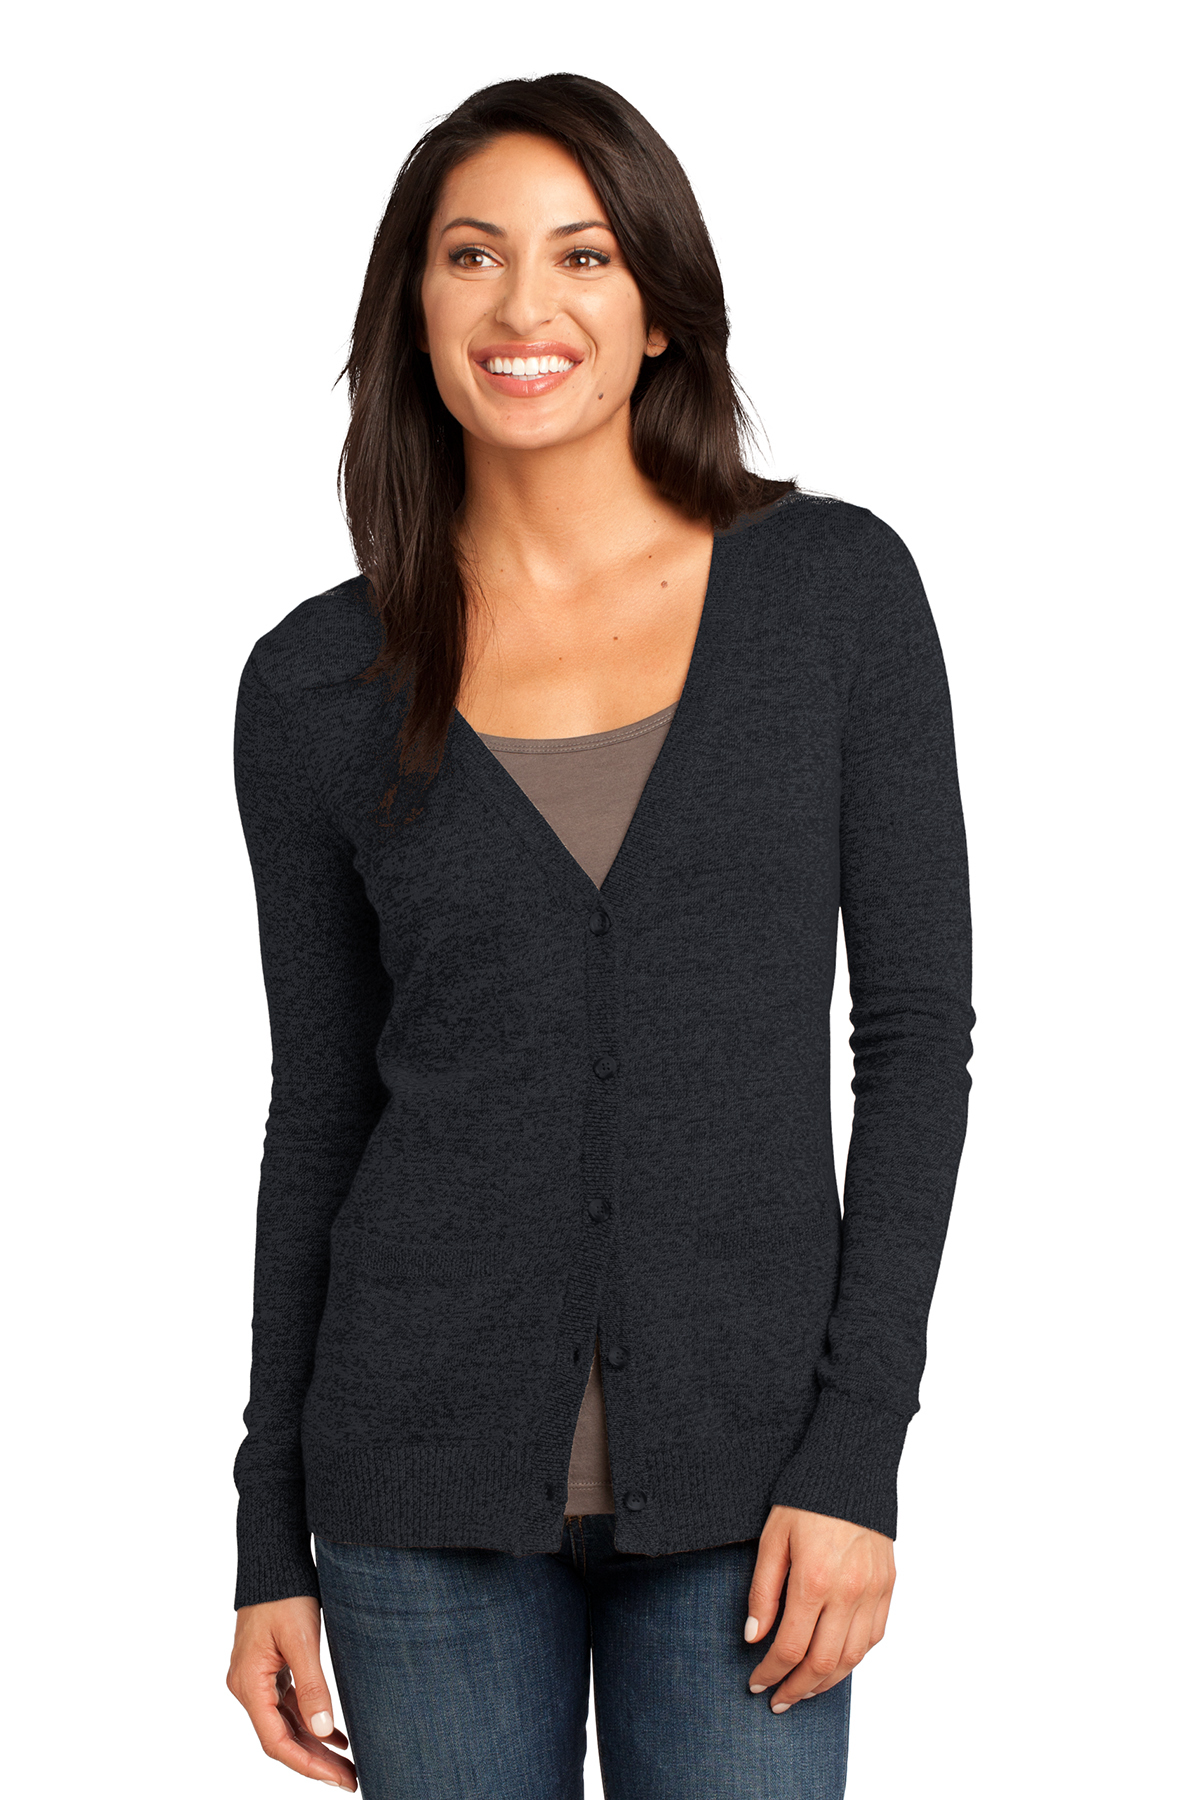 DM415 District Made® - Ladies Cardigan SweaterThe Trophy Trolley